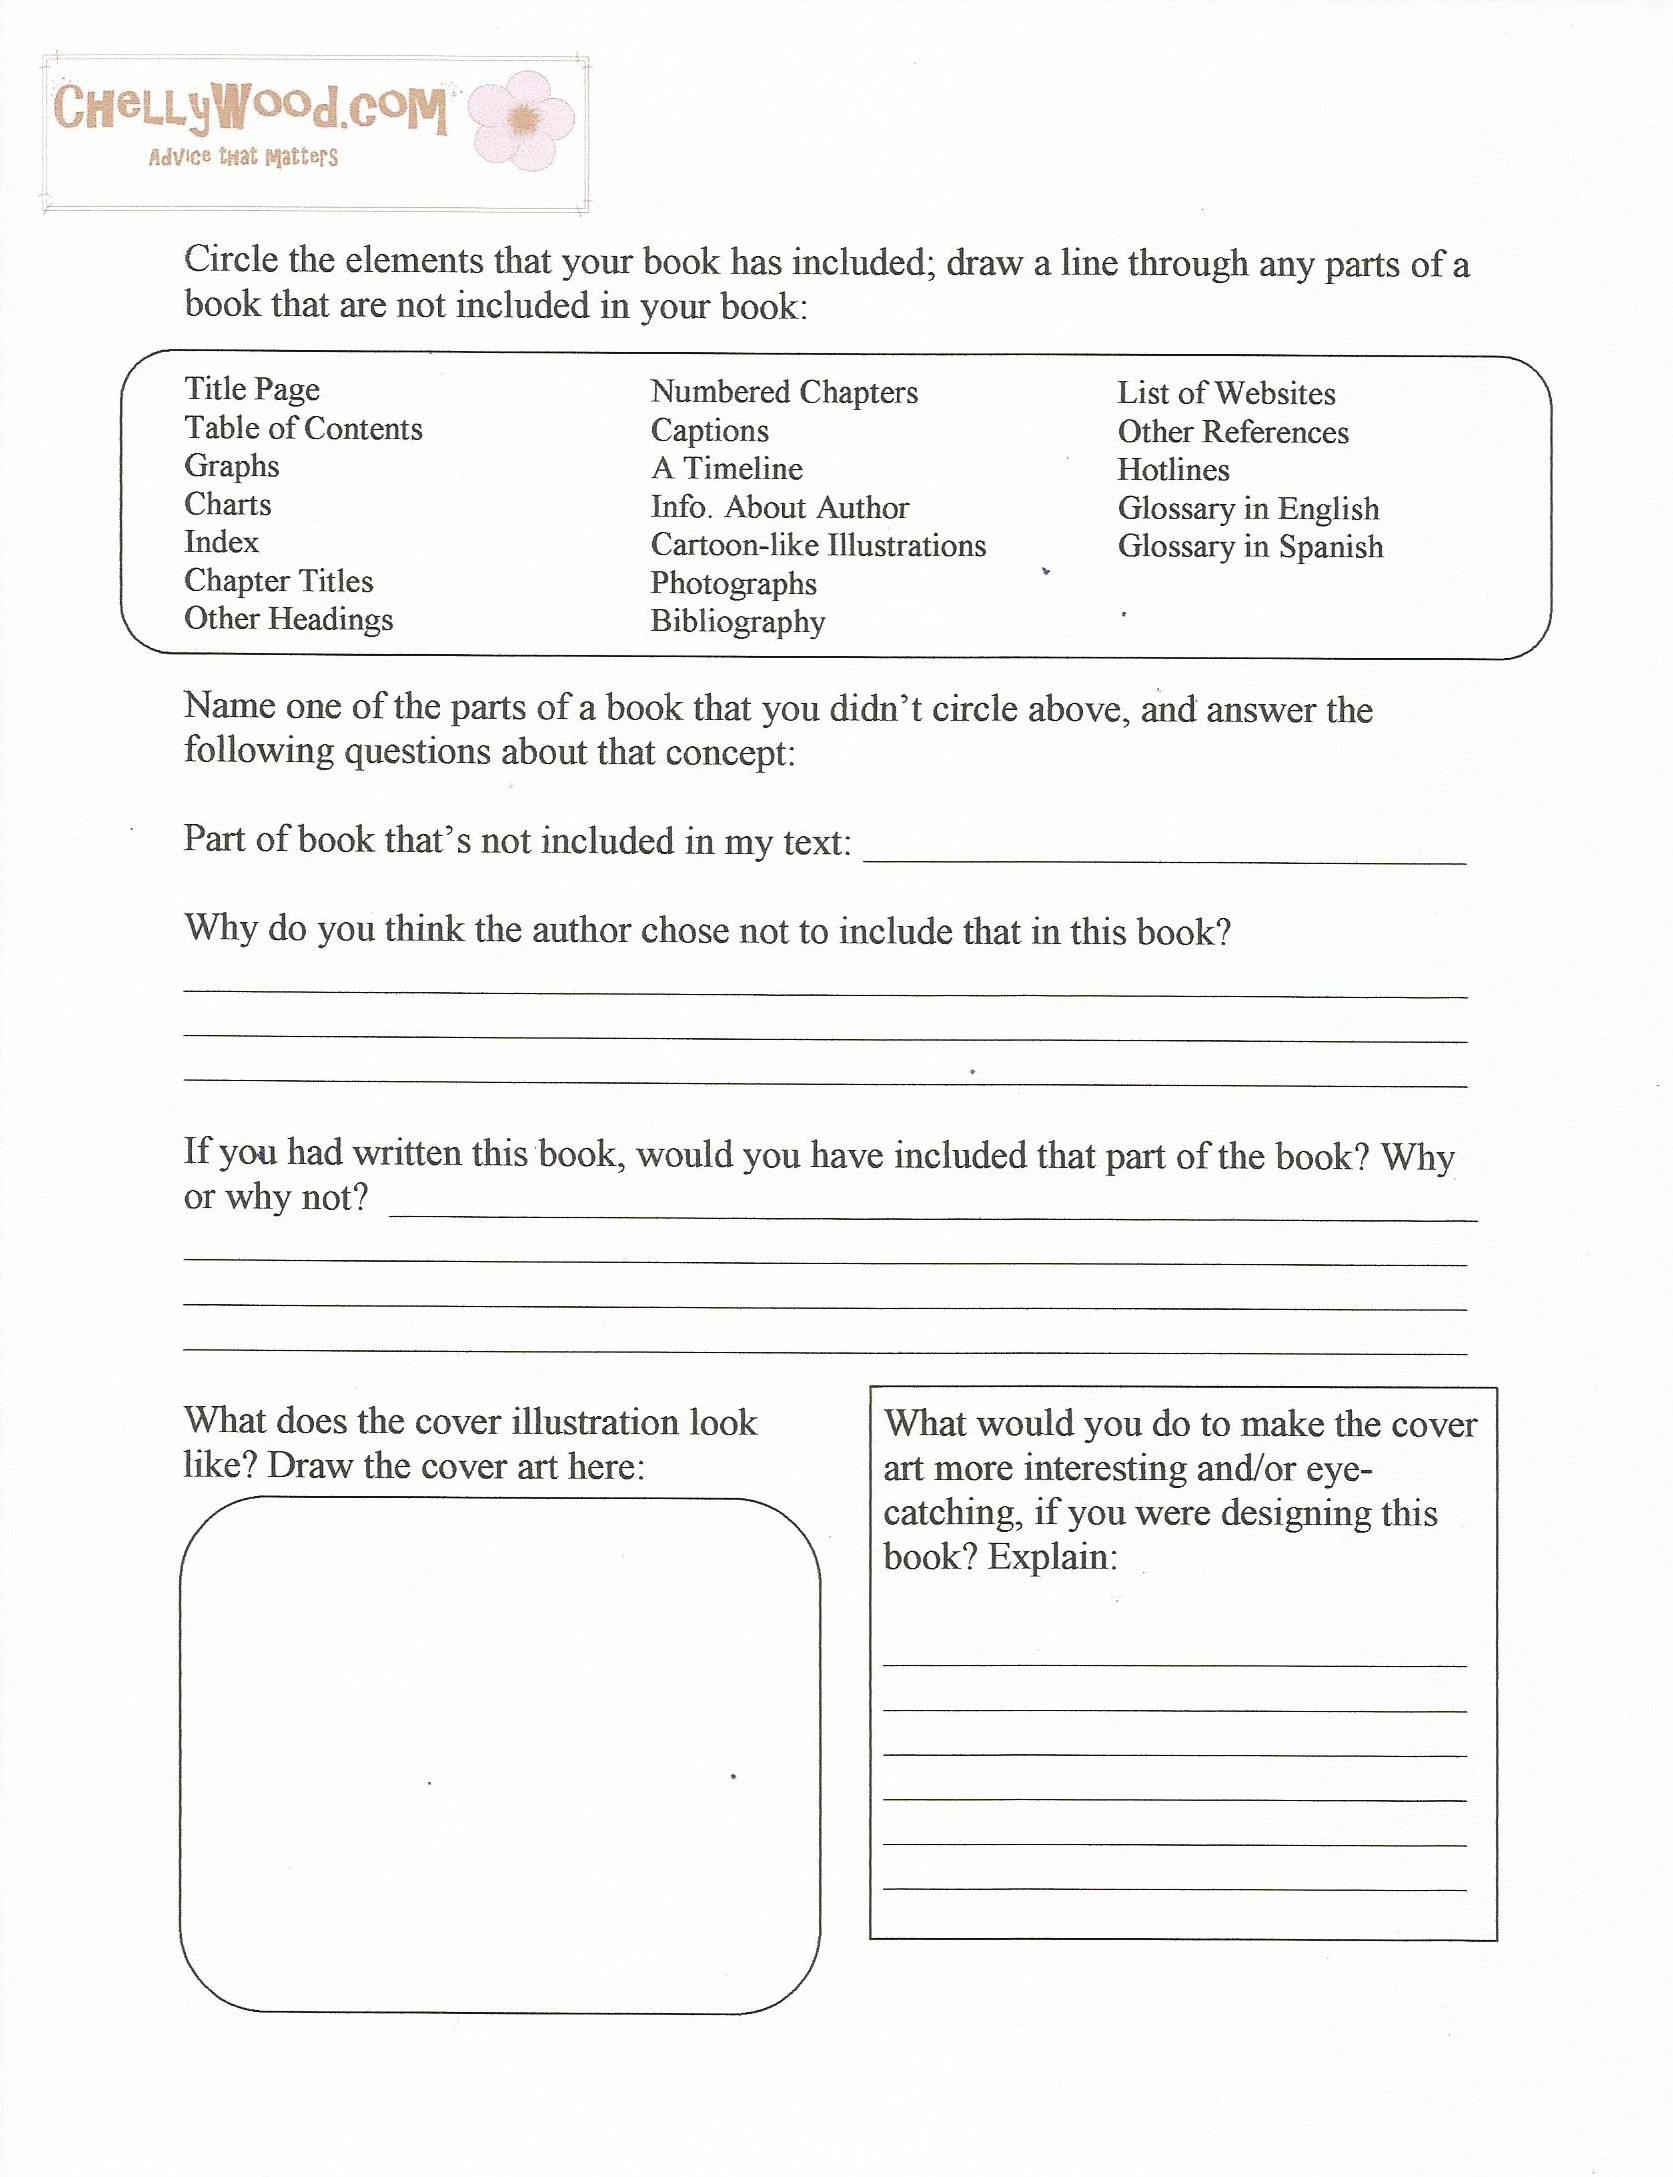 middle-school-book-report-form-free-printable-printable-forms-free-online